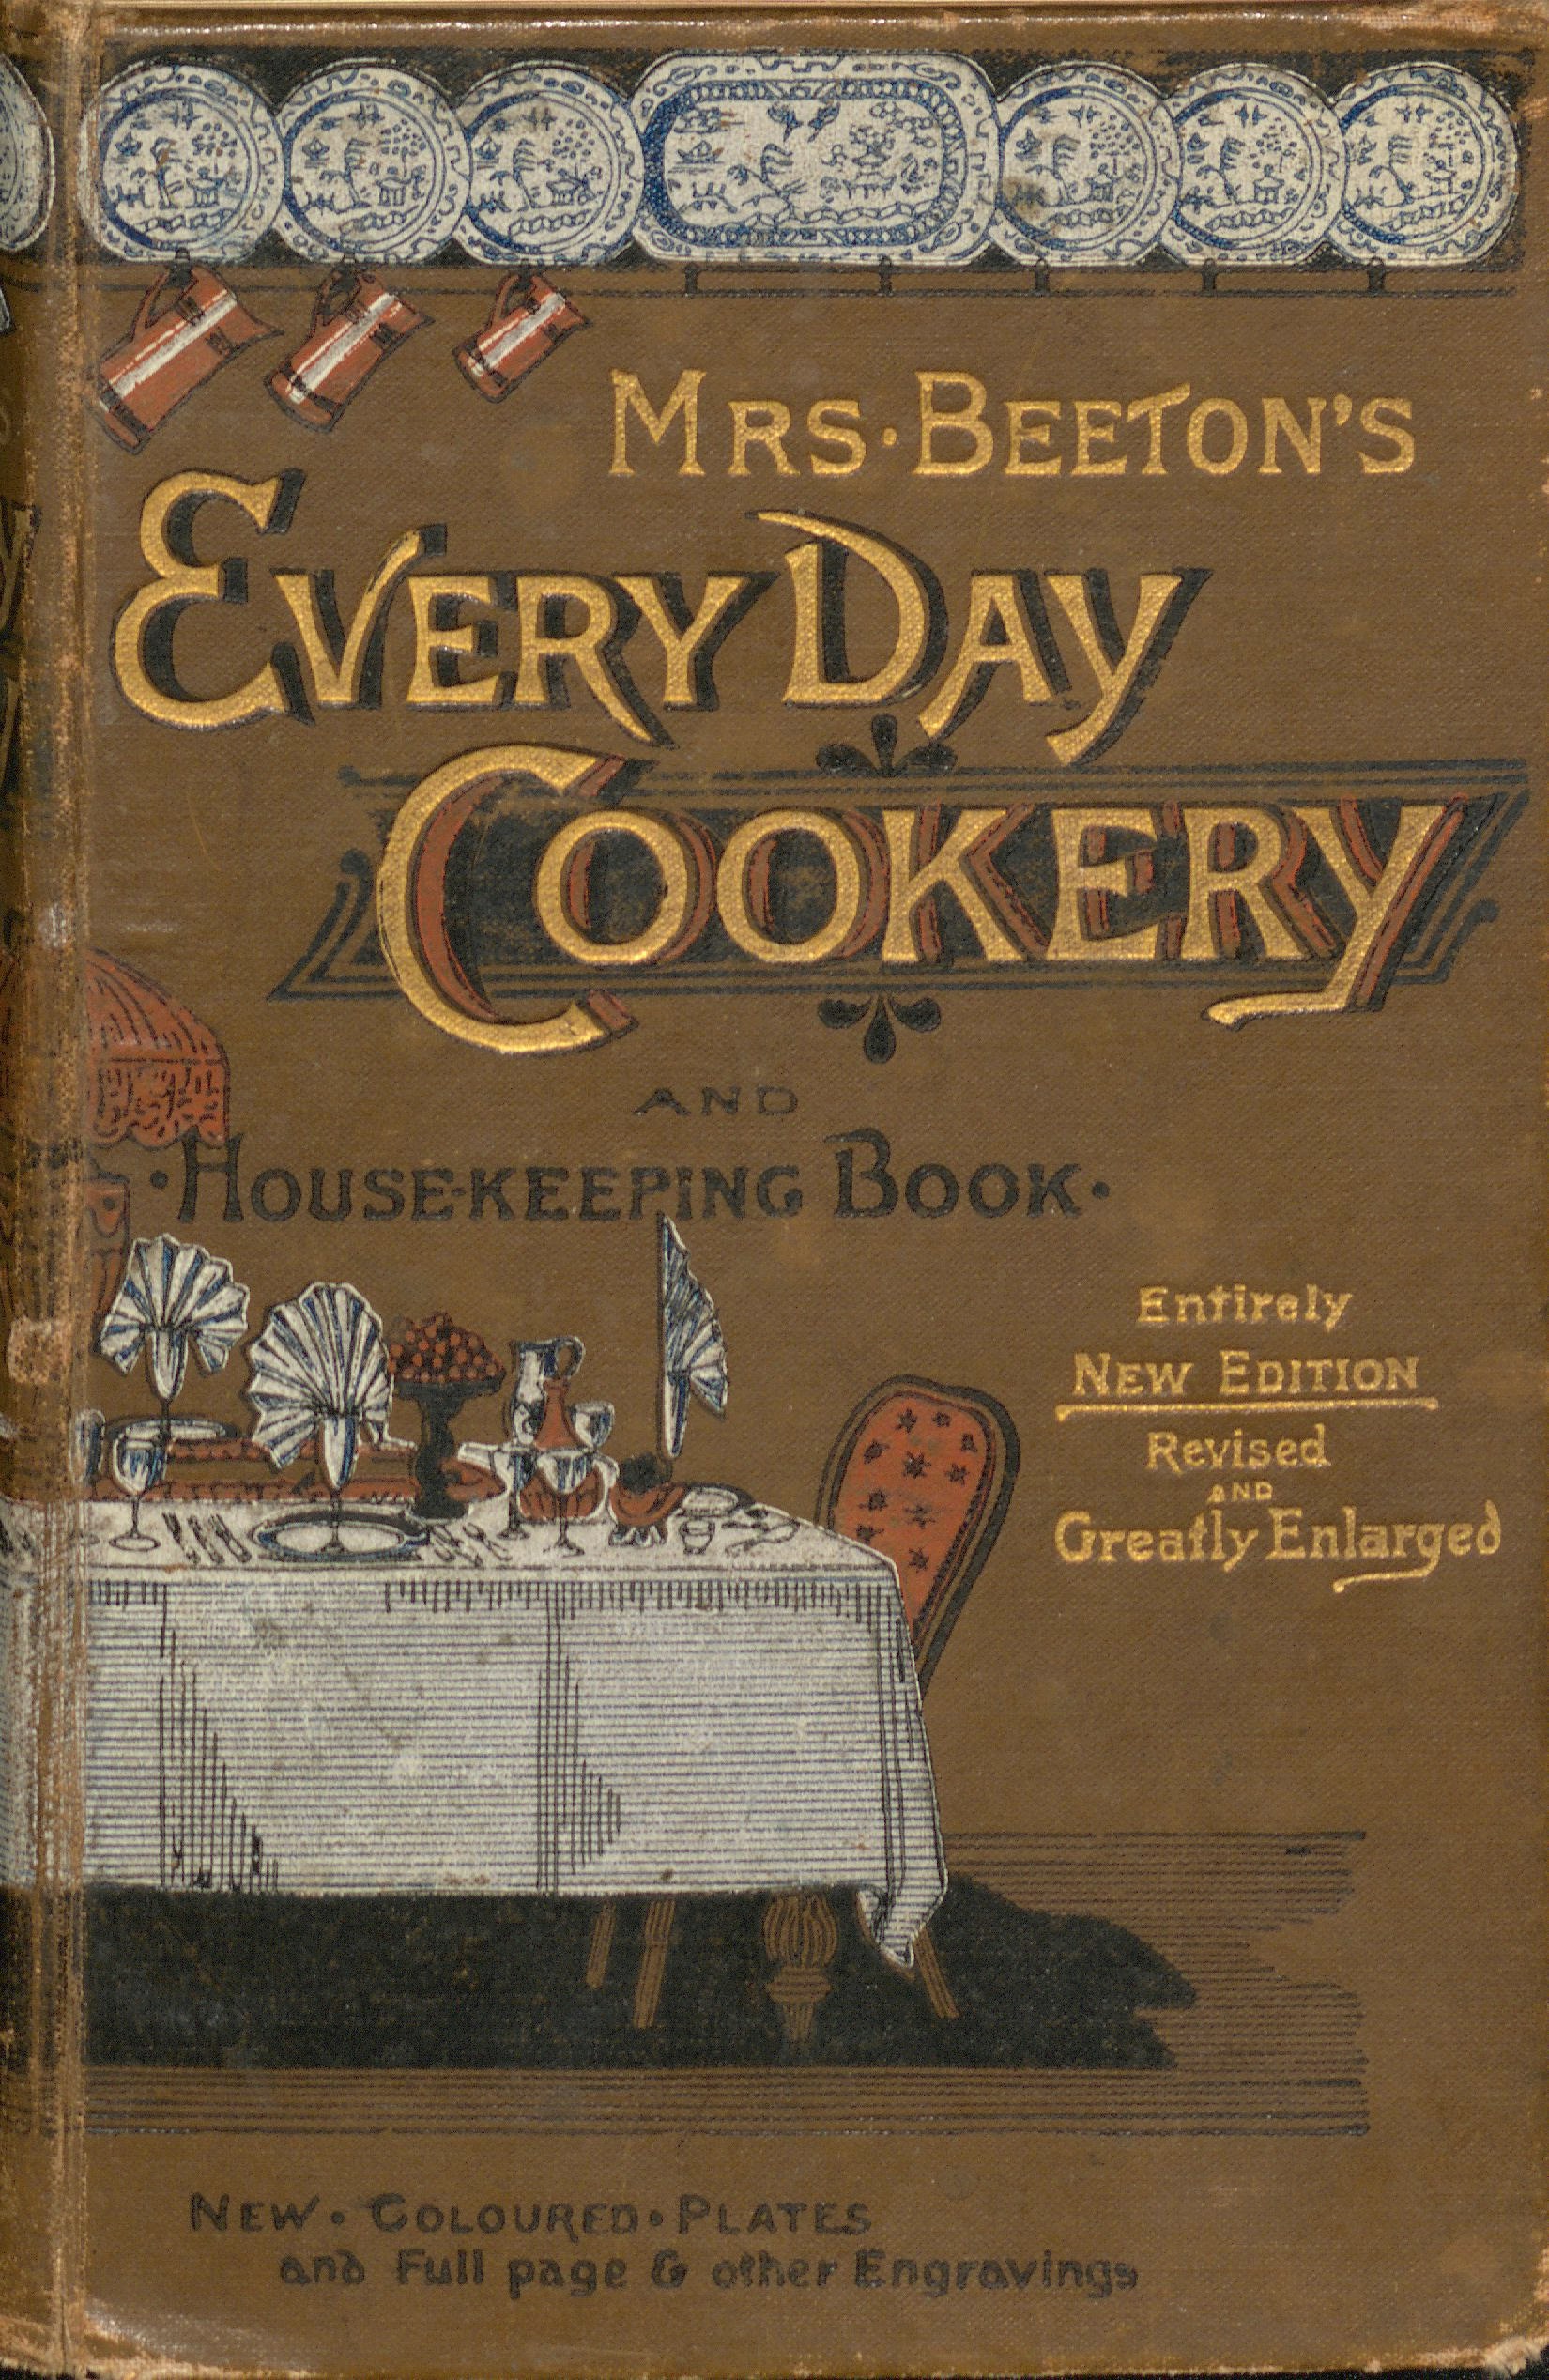 Cookery and housekeeping book